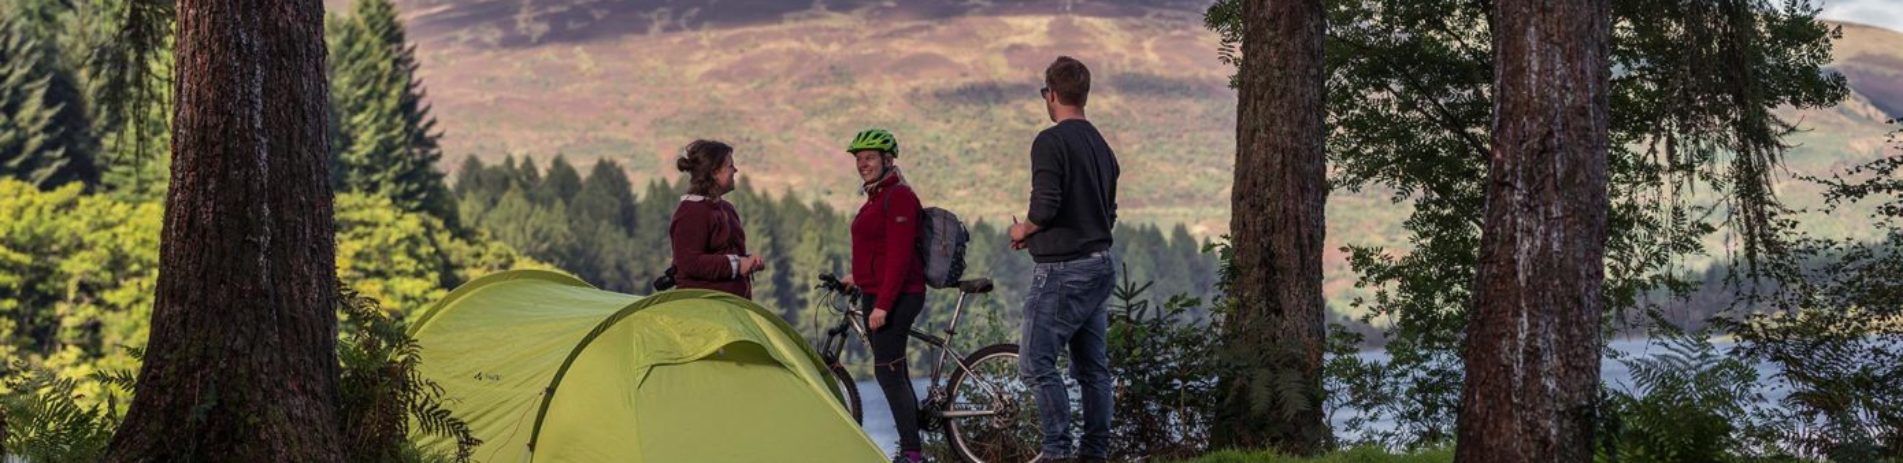 young-couple-pitching-large-green-tent-chatting-with-cyclist-on-three-lochs-forest-drive-landscape-beyond-is-of-forests-and-loch-in-the-sunshine